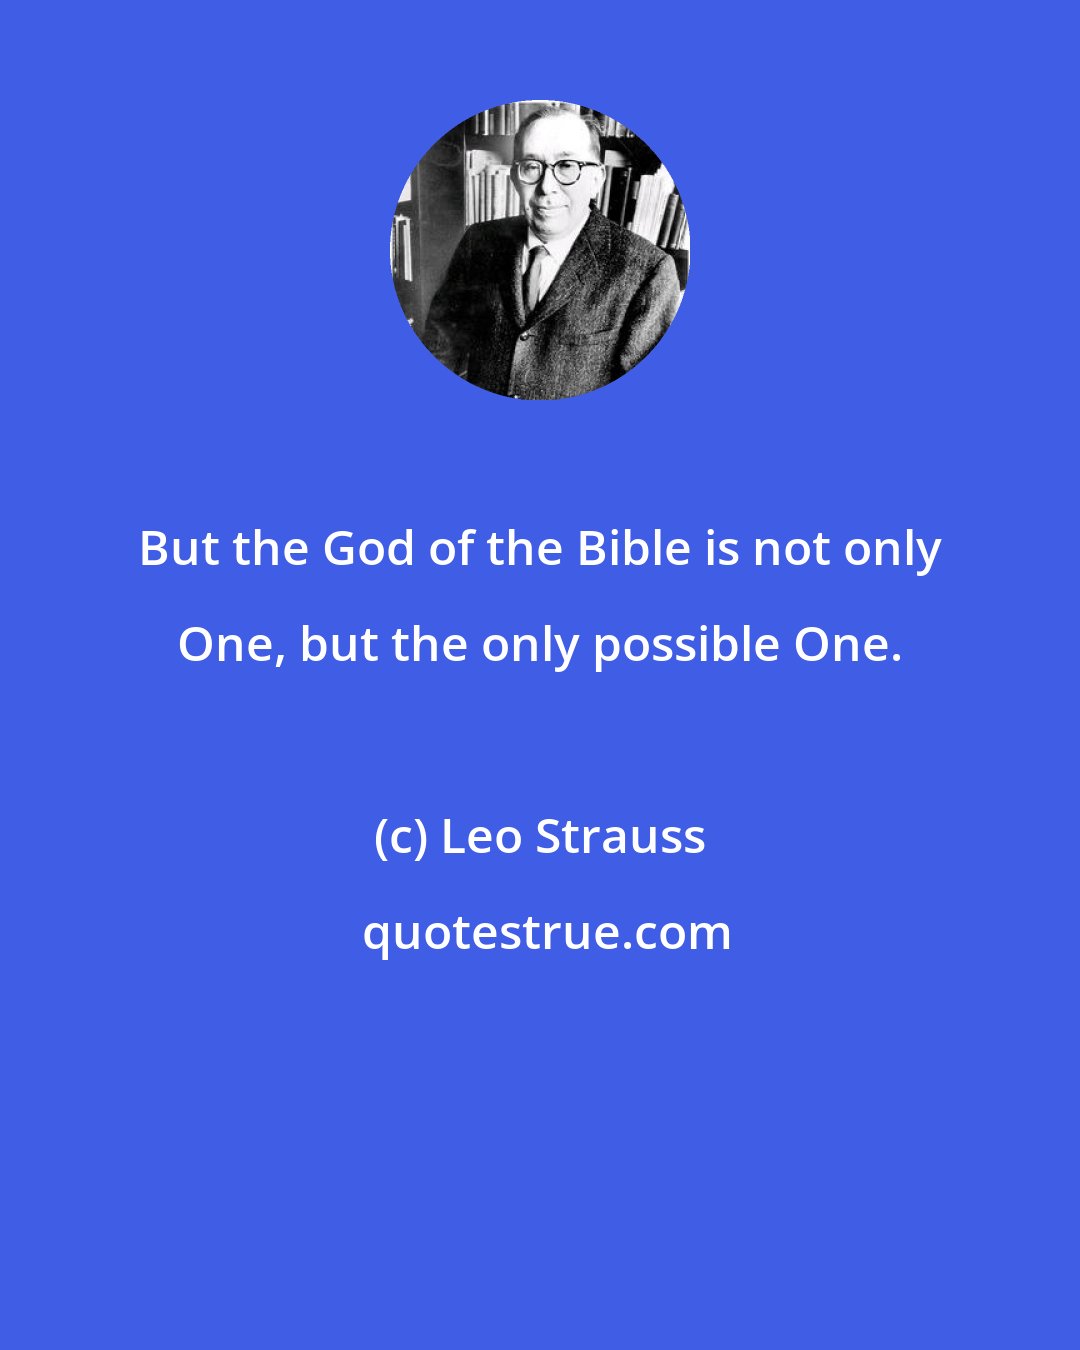 Leo Strauss: But the God of the Bible is not only One, but the only possible One.